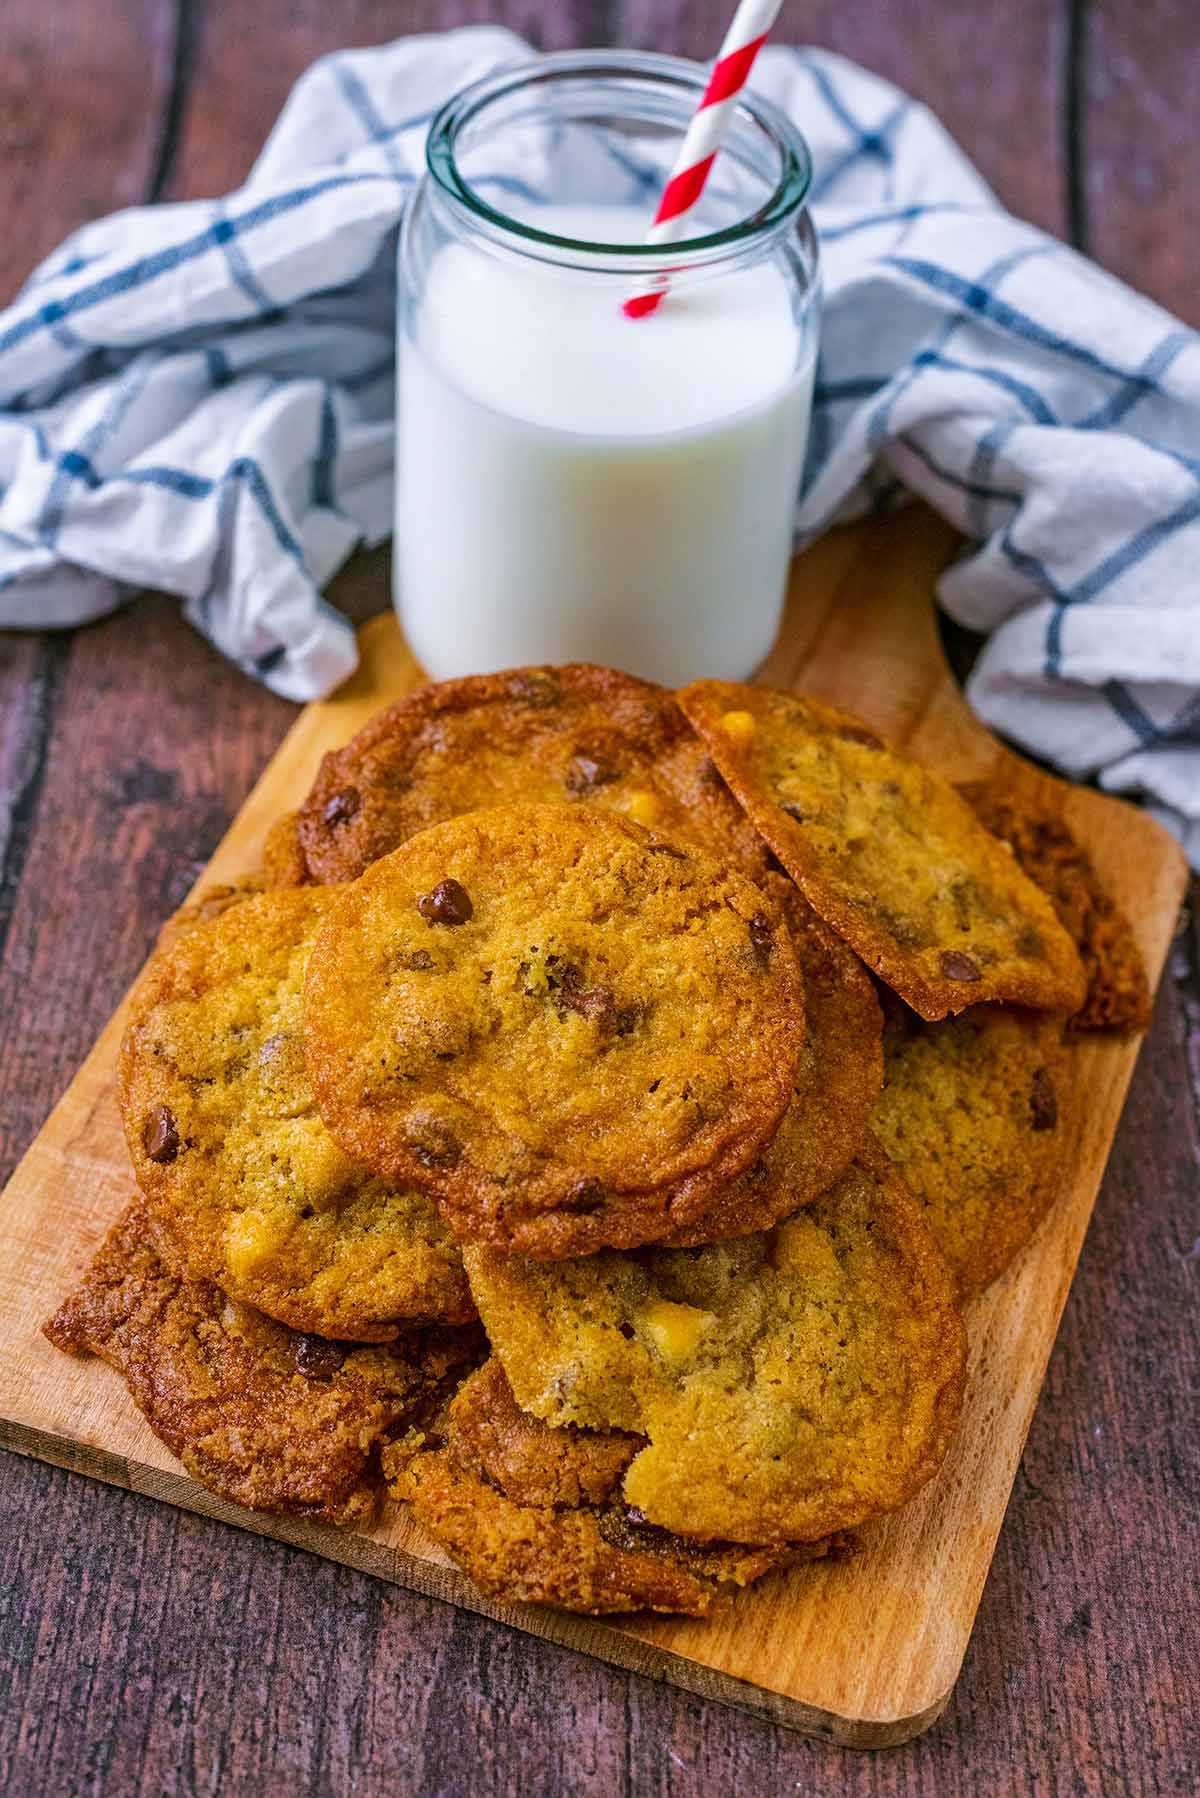 A pile of chocolate chip cookies on a wooden board with a glass of milk.